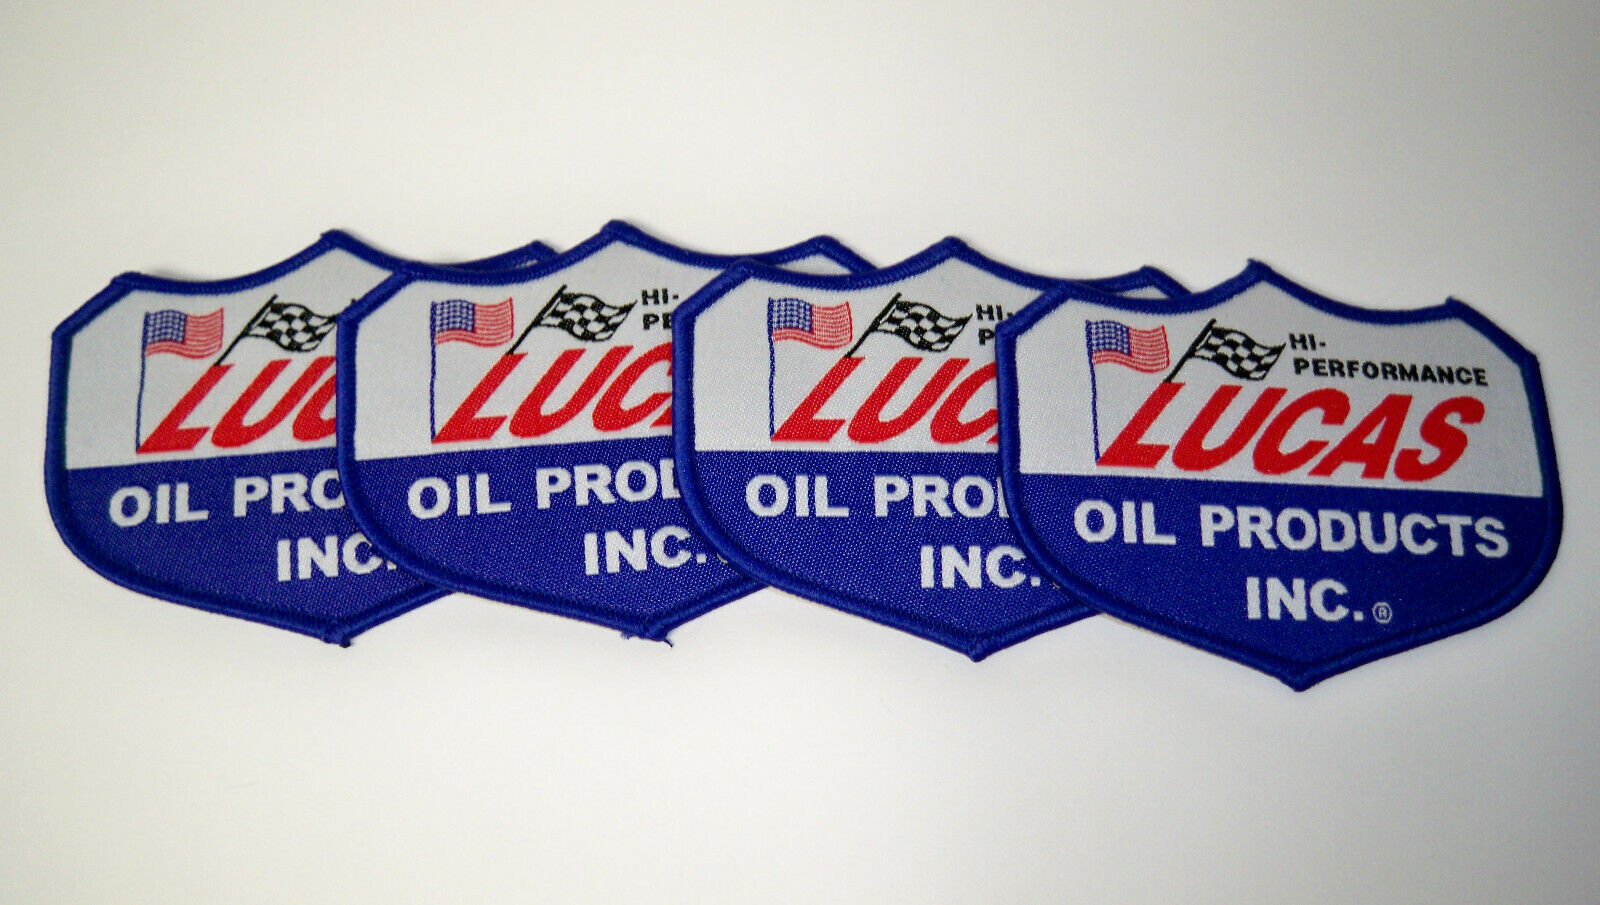 Lucas Oil Products Inc. Iron-on Patch (Qty 4)